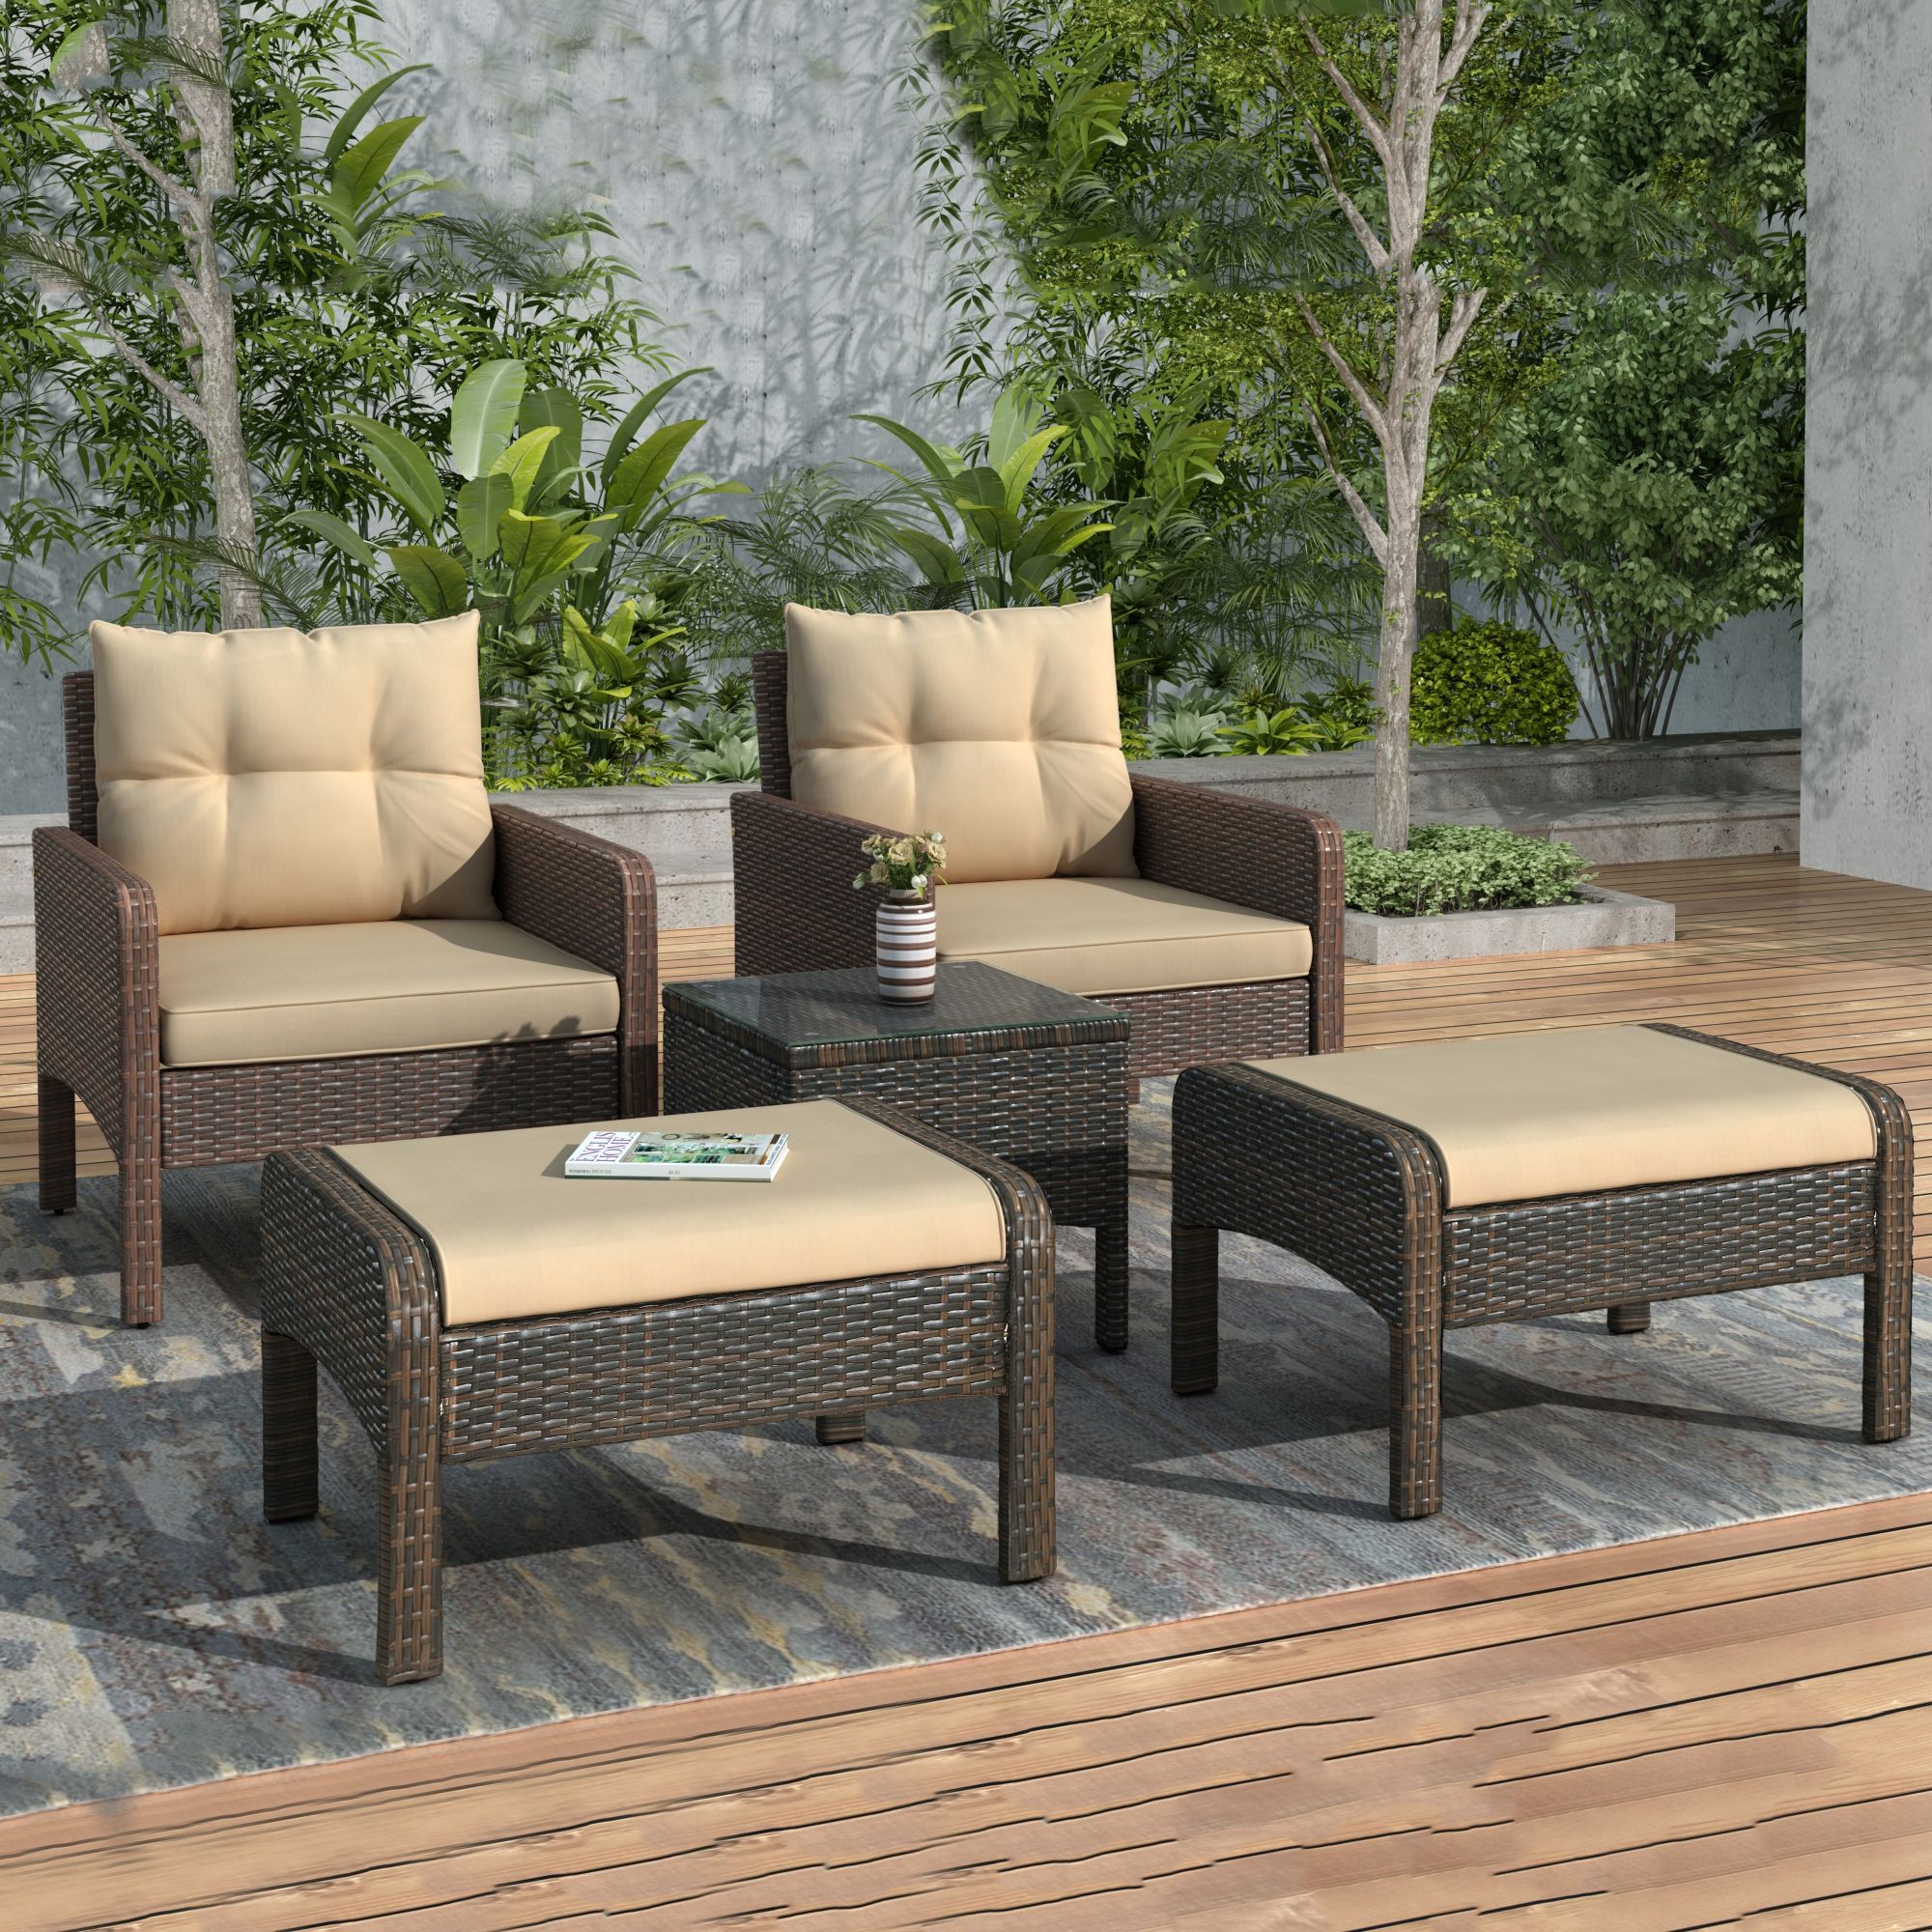 Urhomepro 5 Piece Patio Wicker Sofa Set, Outdoor Furniture Throughout 5 Piece Console Tables (View 5 of 20)